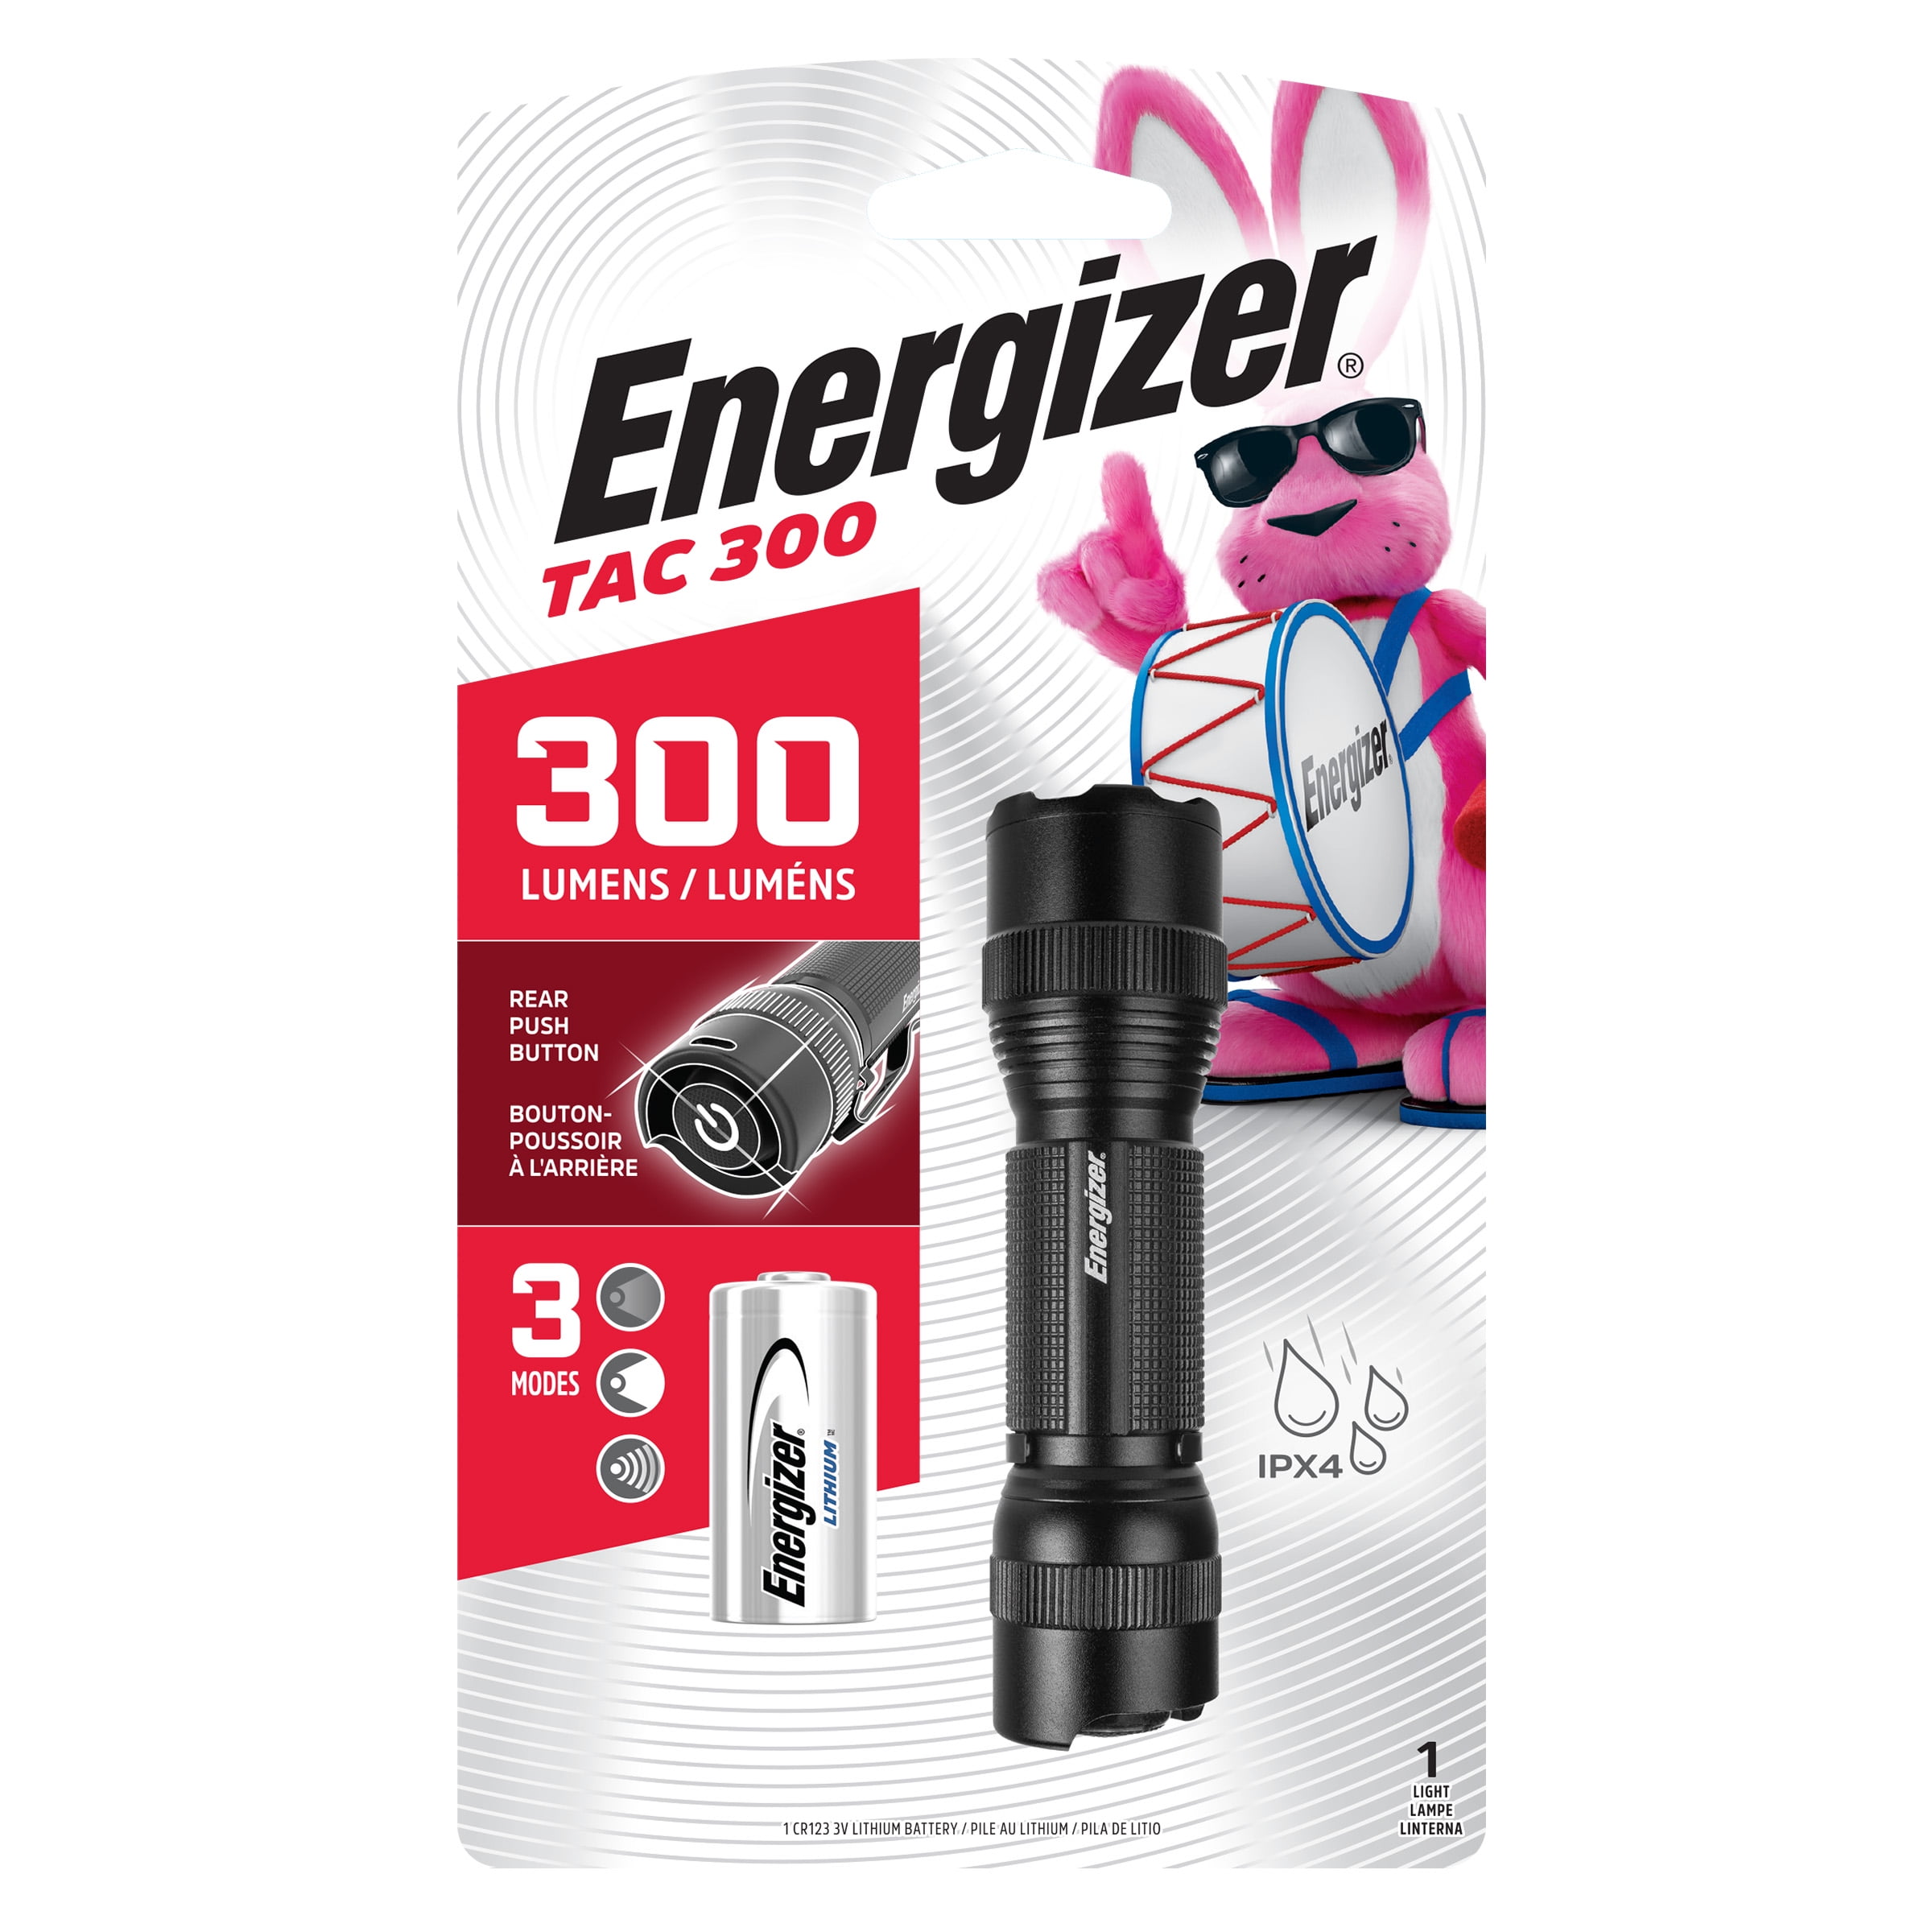 Energizer TAC-300 Tactical LED 300 Lumens Flashlight, with CR123 Lithium  Battery